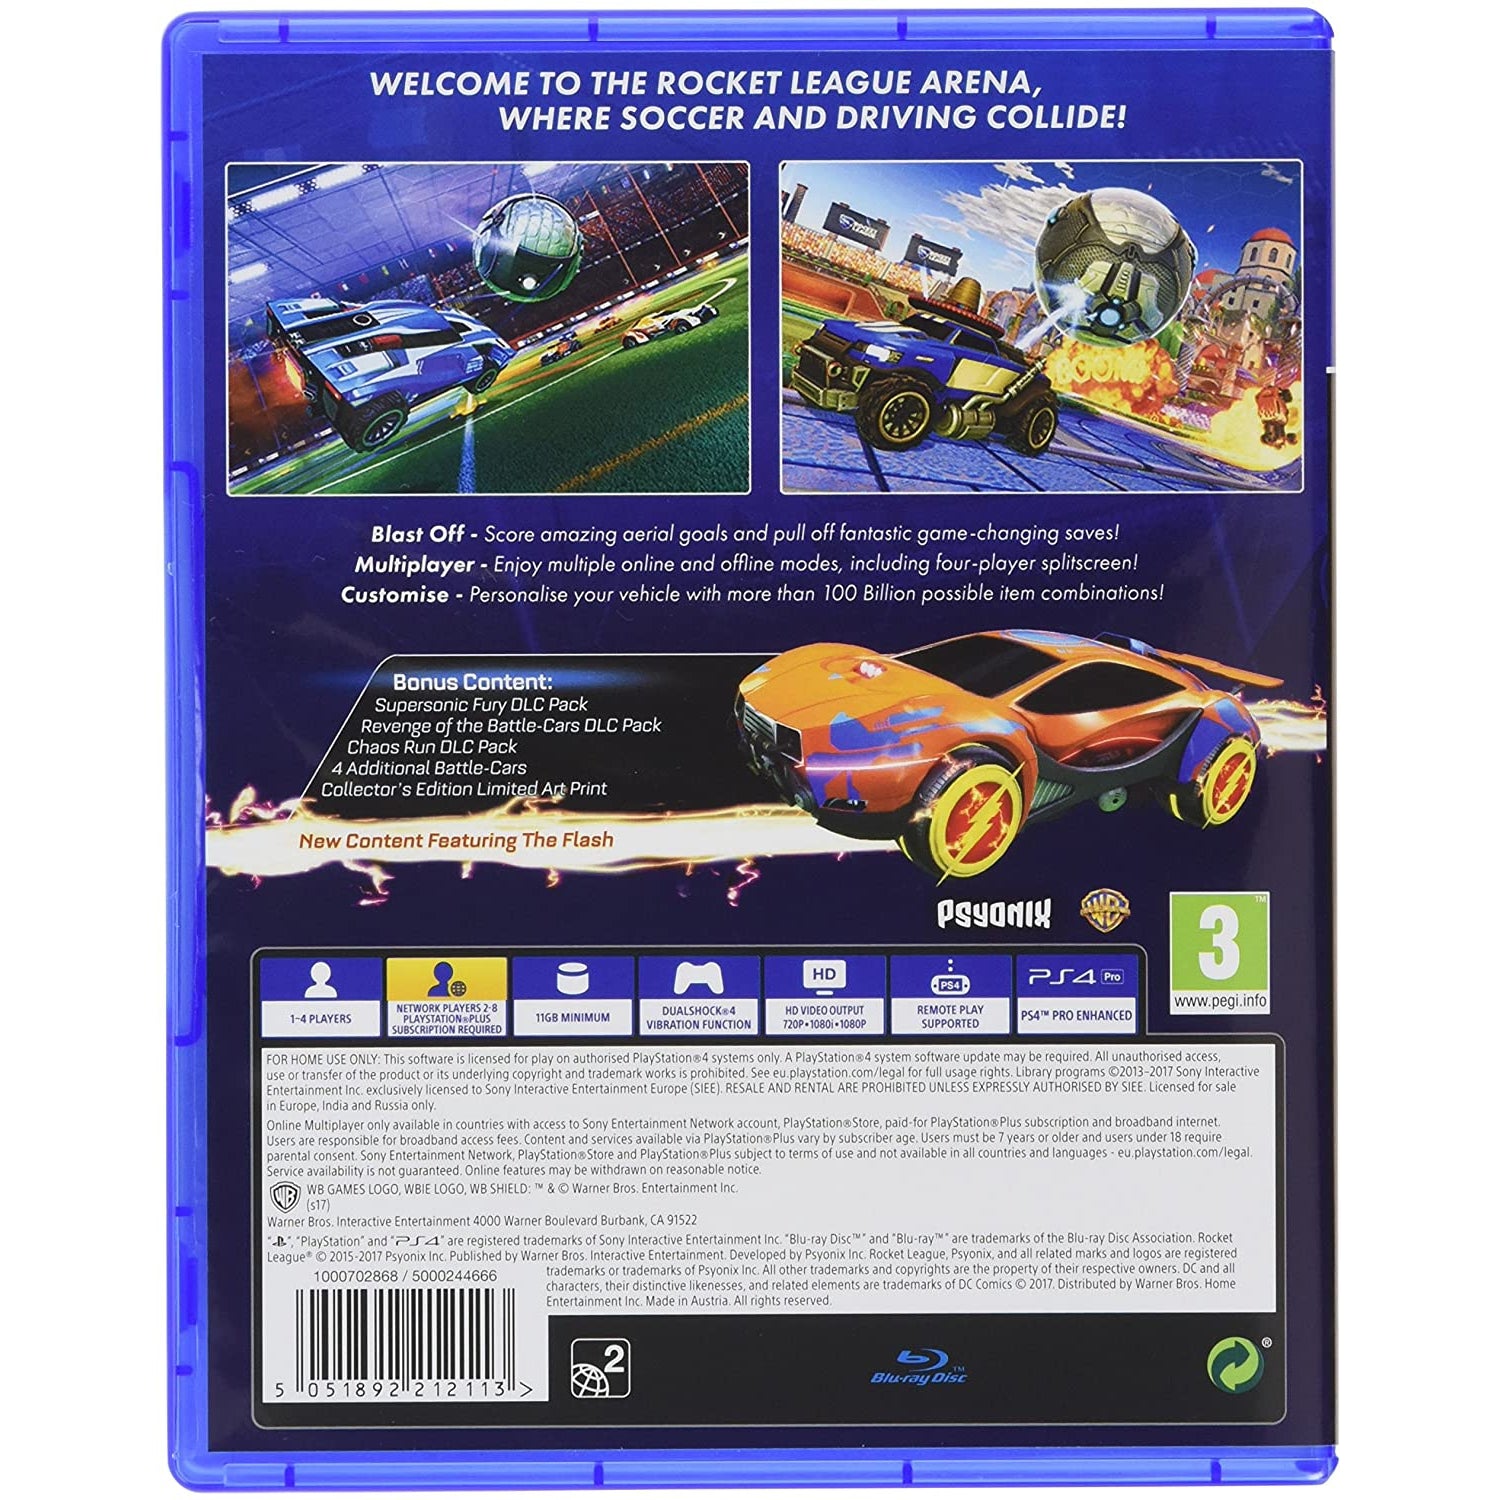 Rocket League Collector's Edition (Playstation 4 PS4)